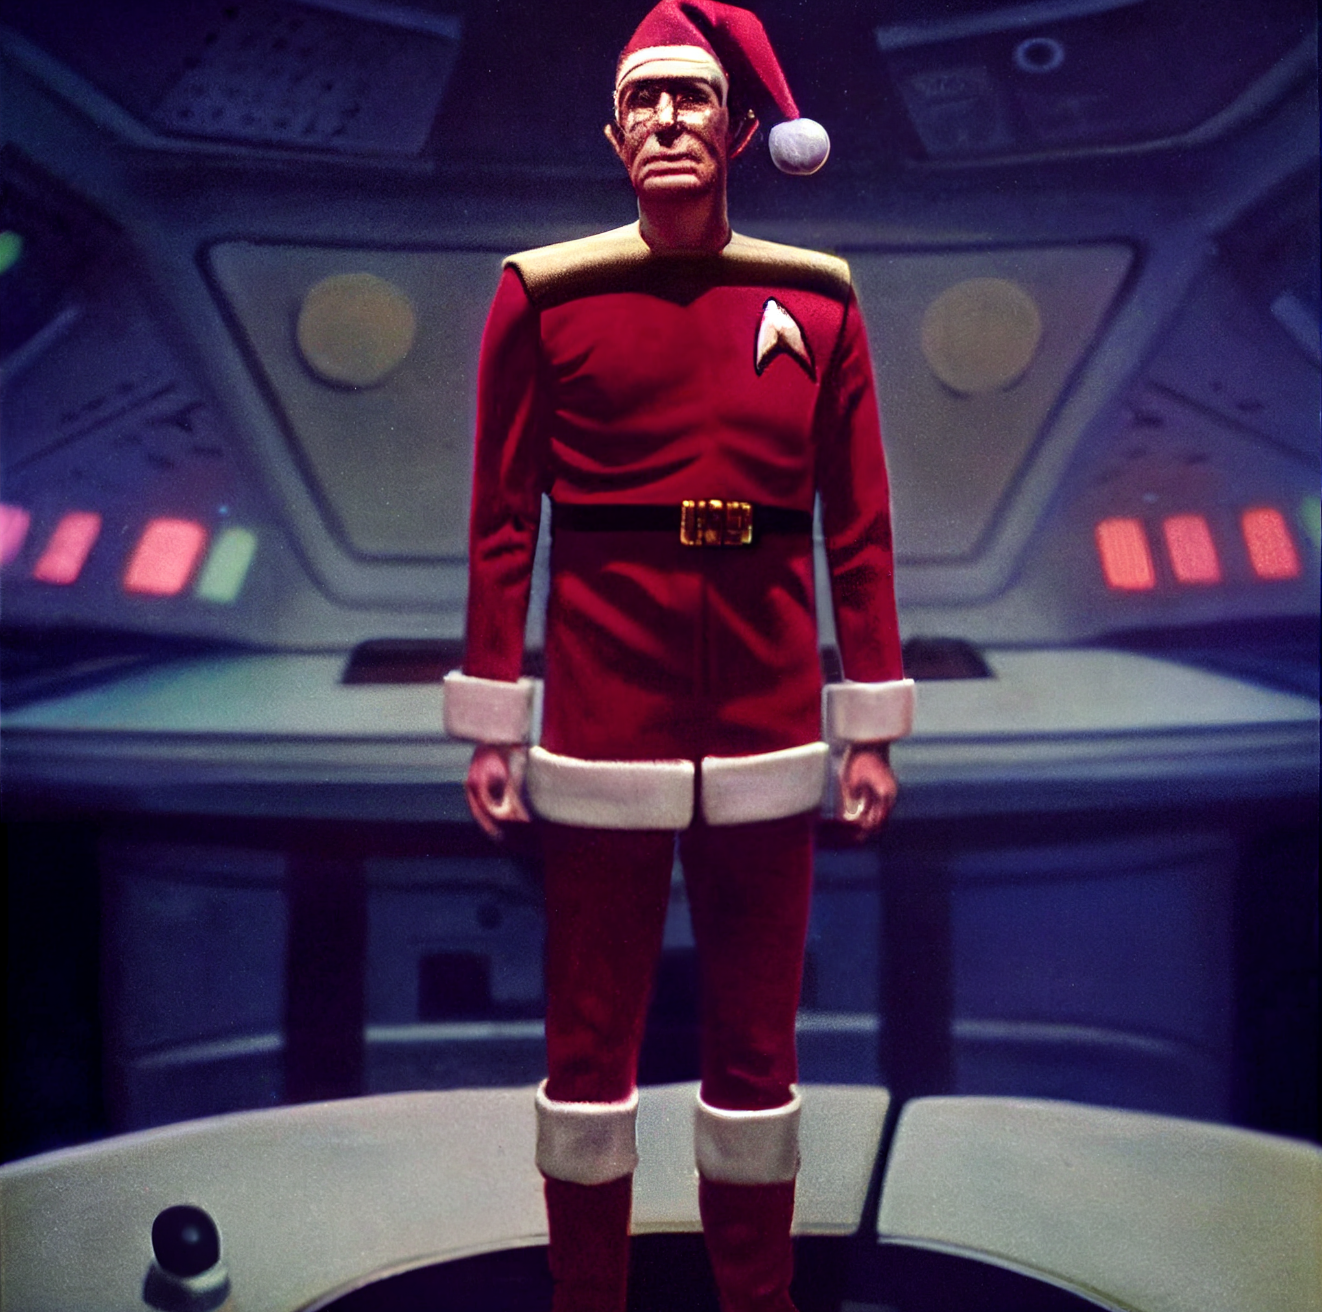 Mr. Spock as a Christmas elf on the deck of the Starship Enterprise, photorealistic